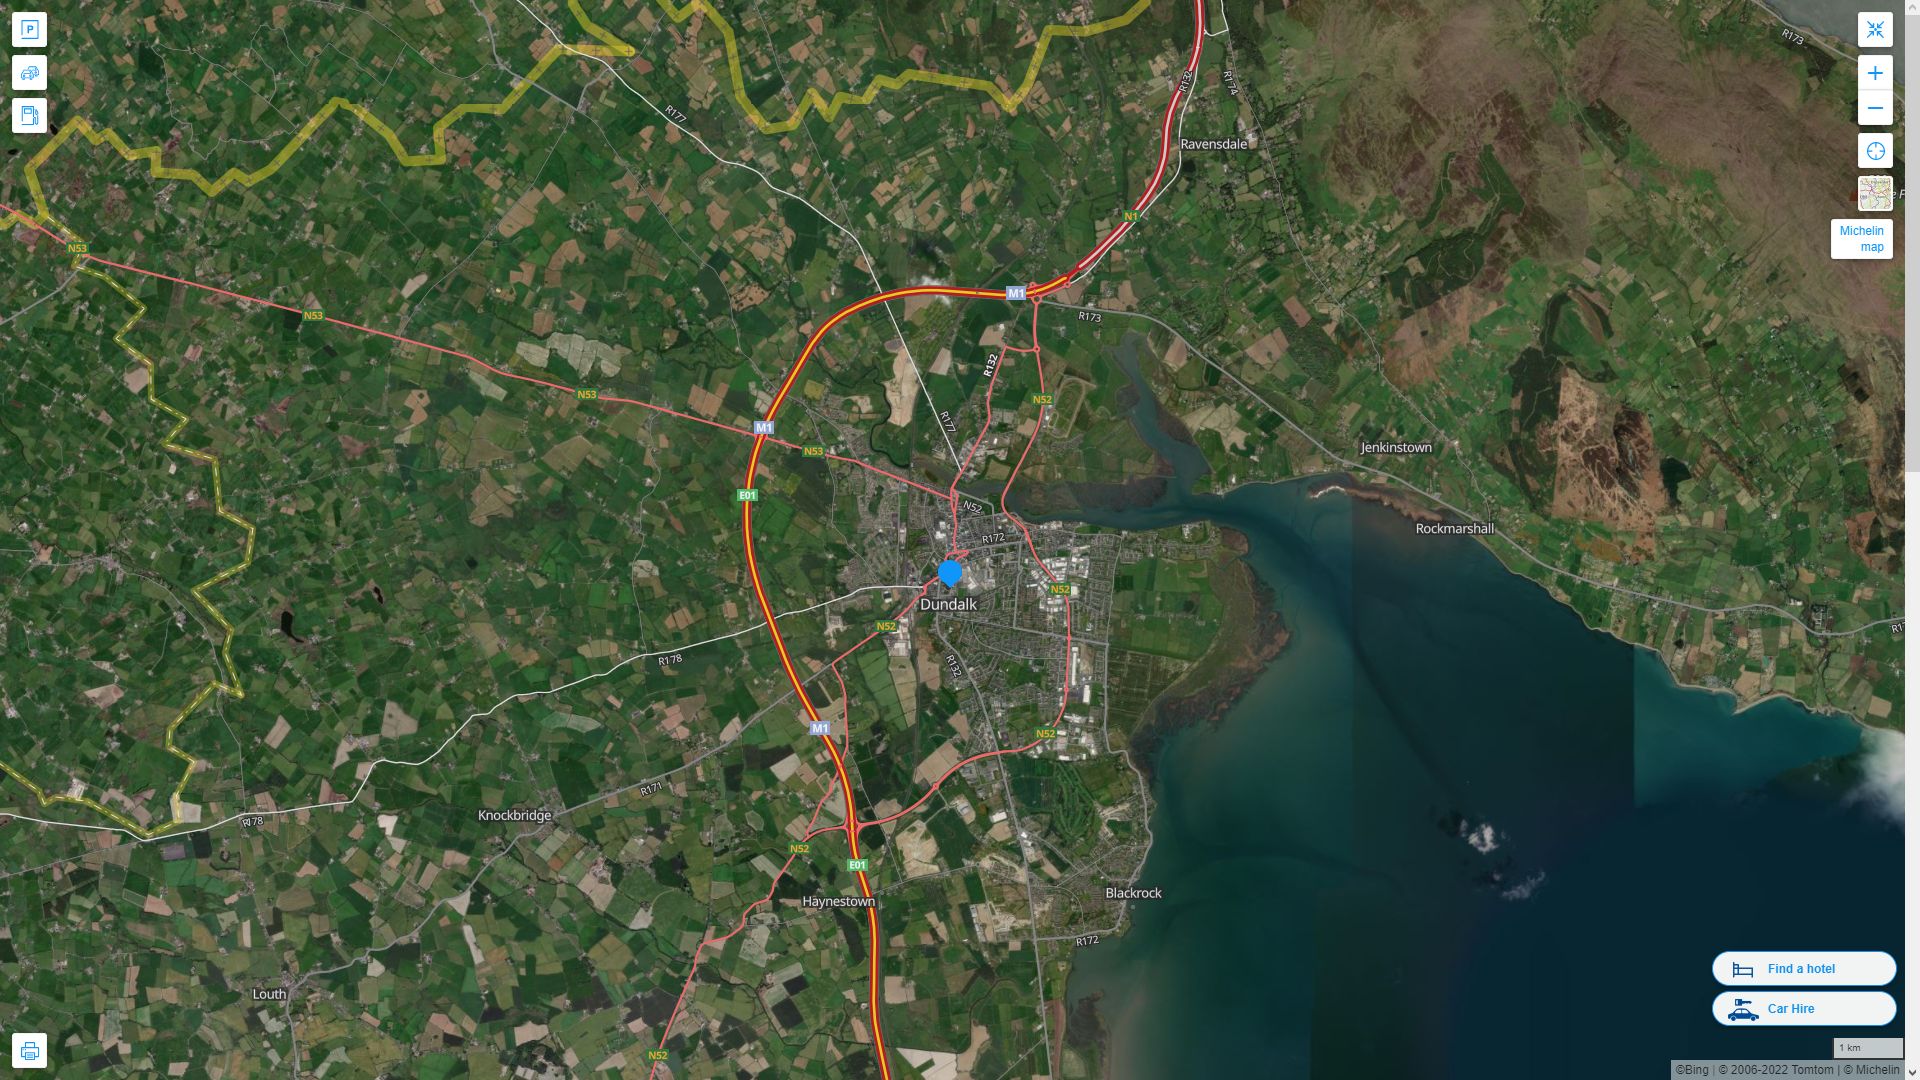 Dundalk Highway and Road Map with Satellite View